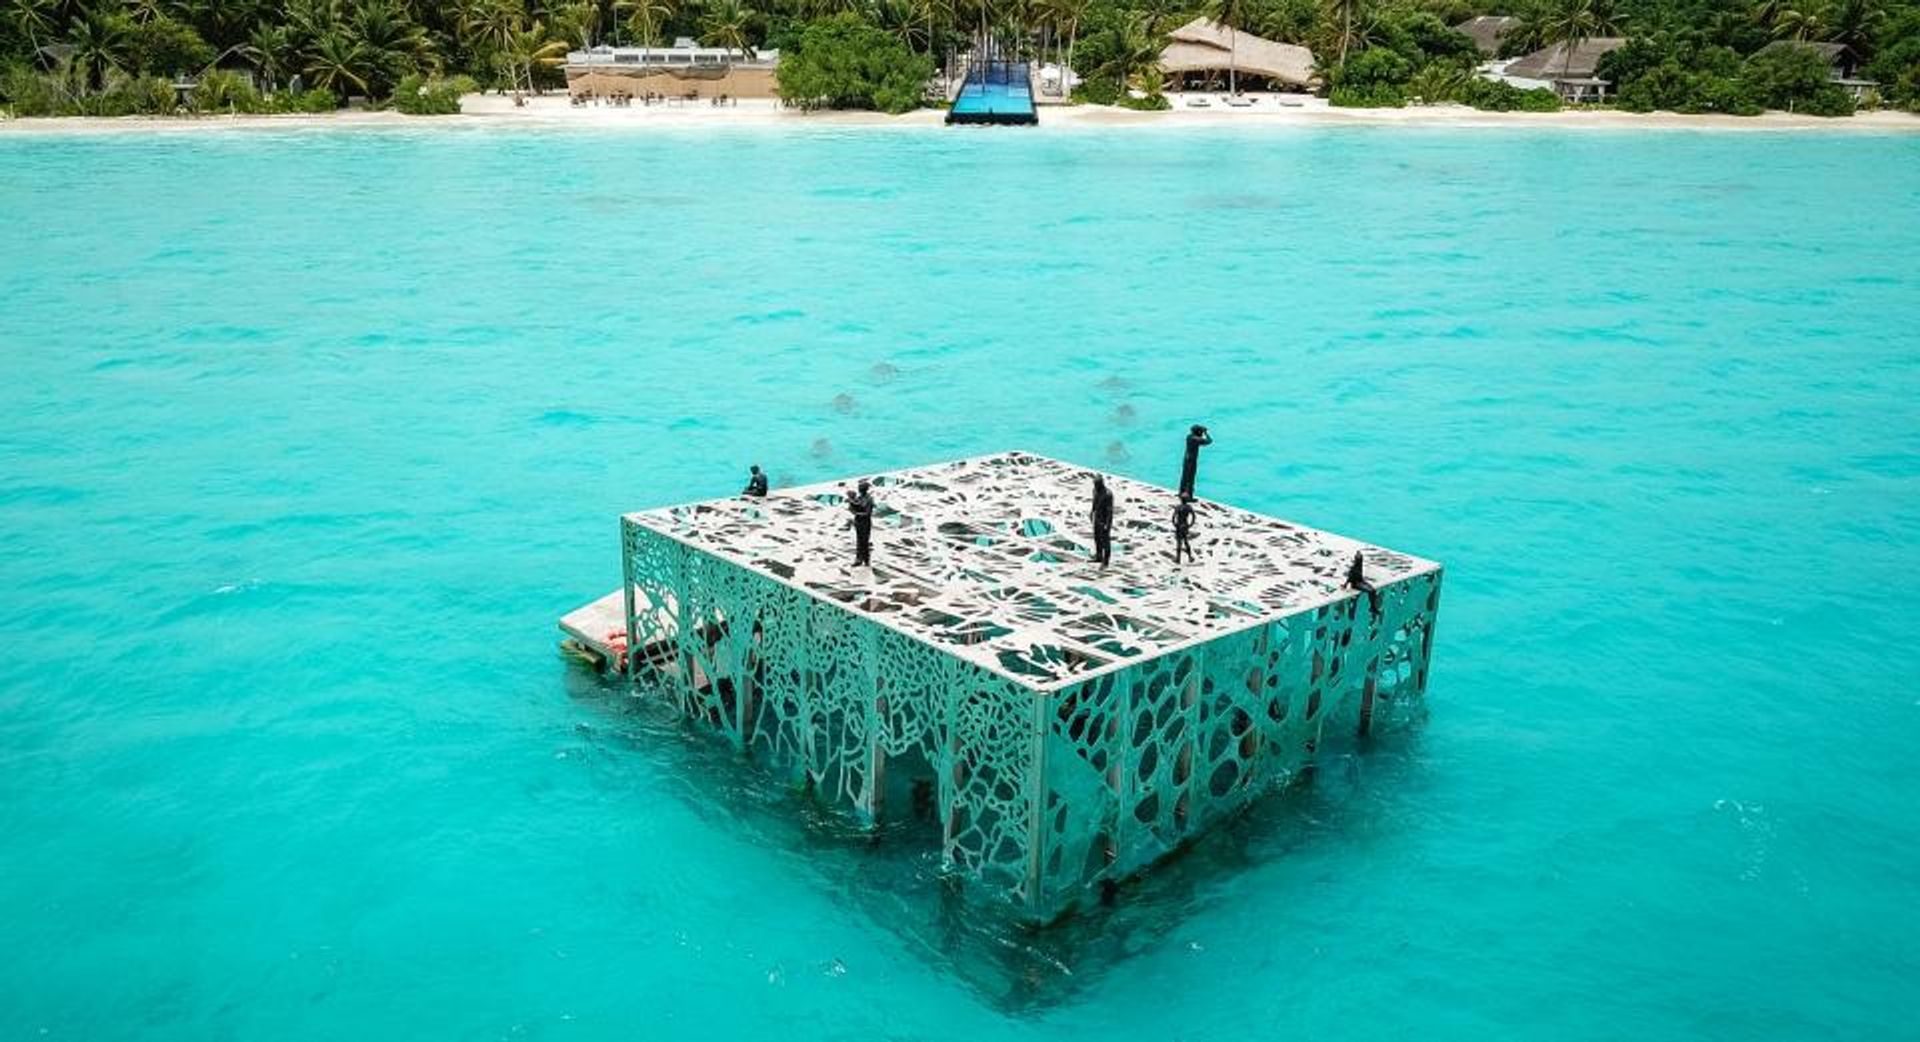 Jason deCaires Taylor's Coralarium in Sirru Fen Fushi, Maldives before the sculptures were destroyed © The artist/courtesy of Accor Hotels